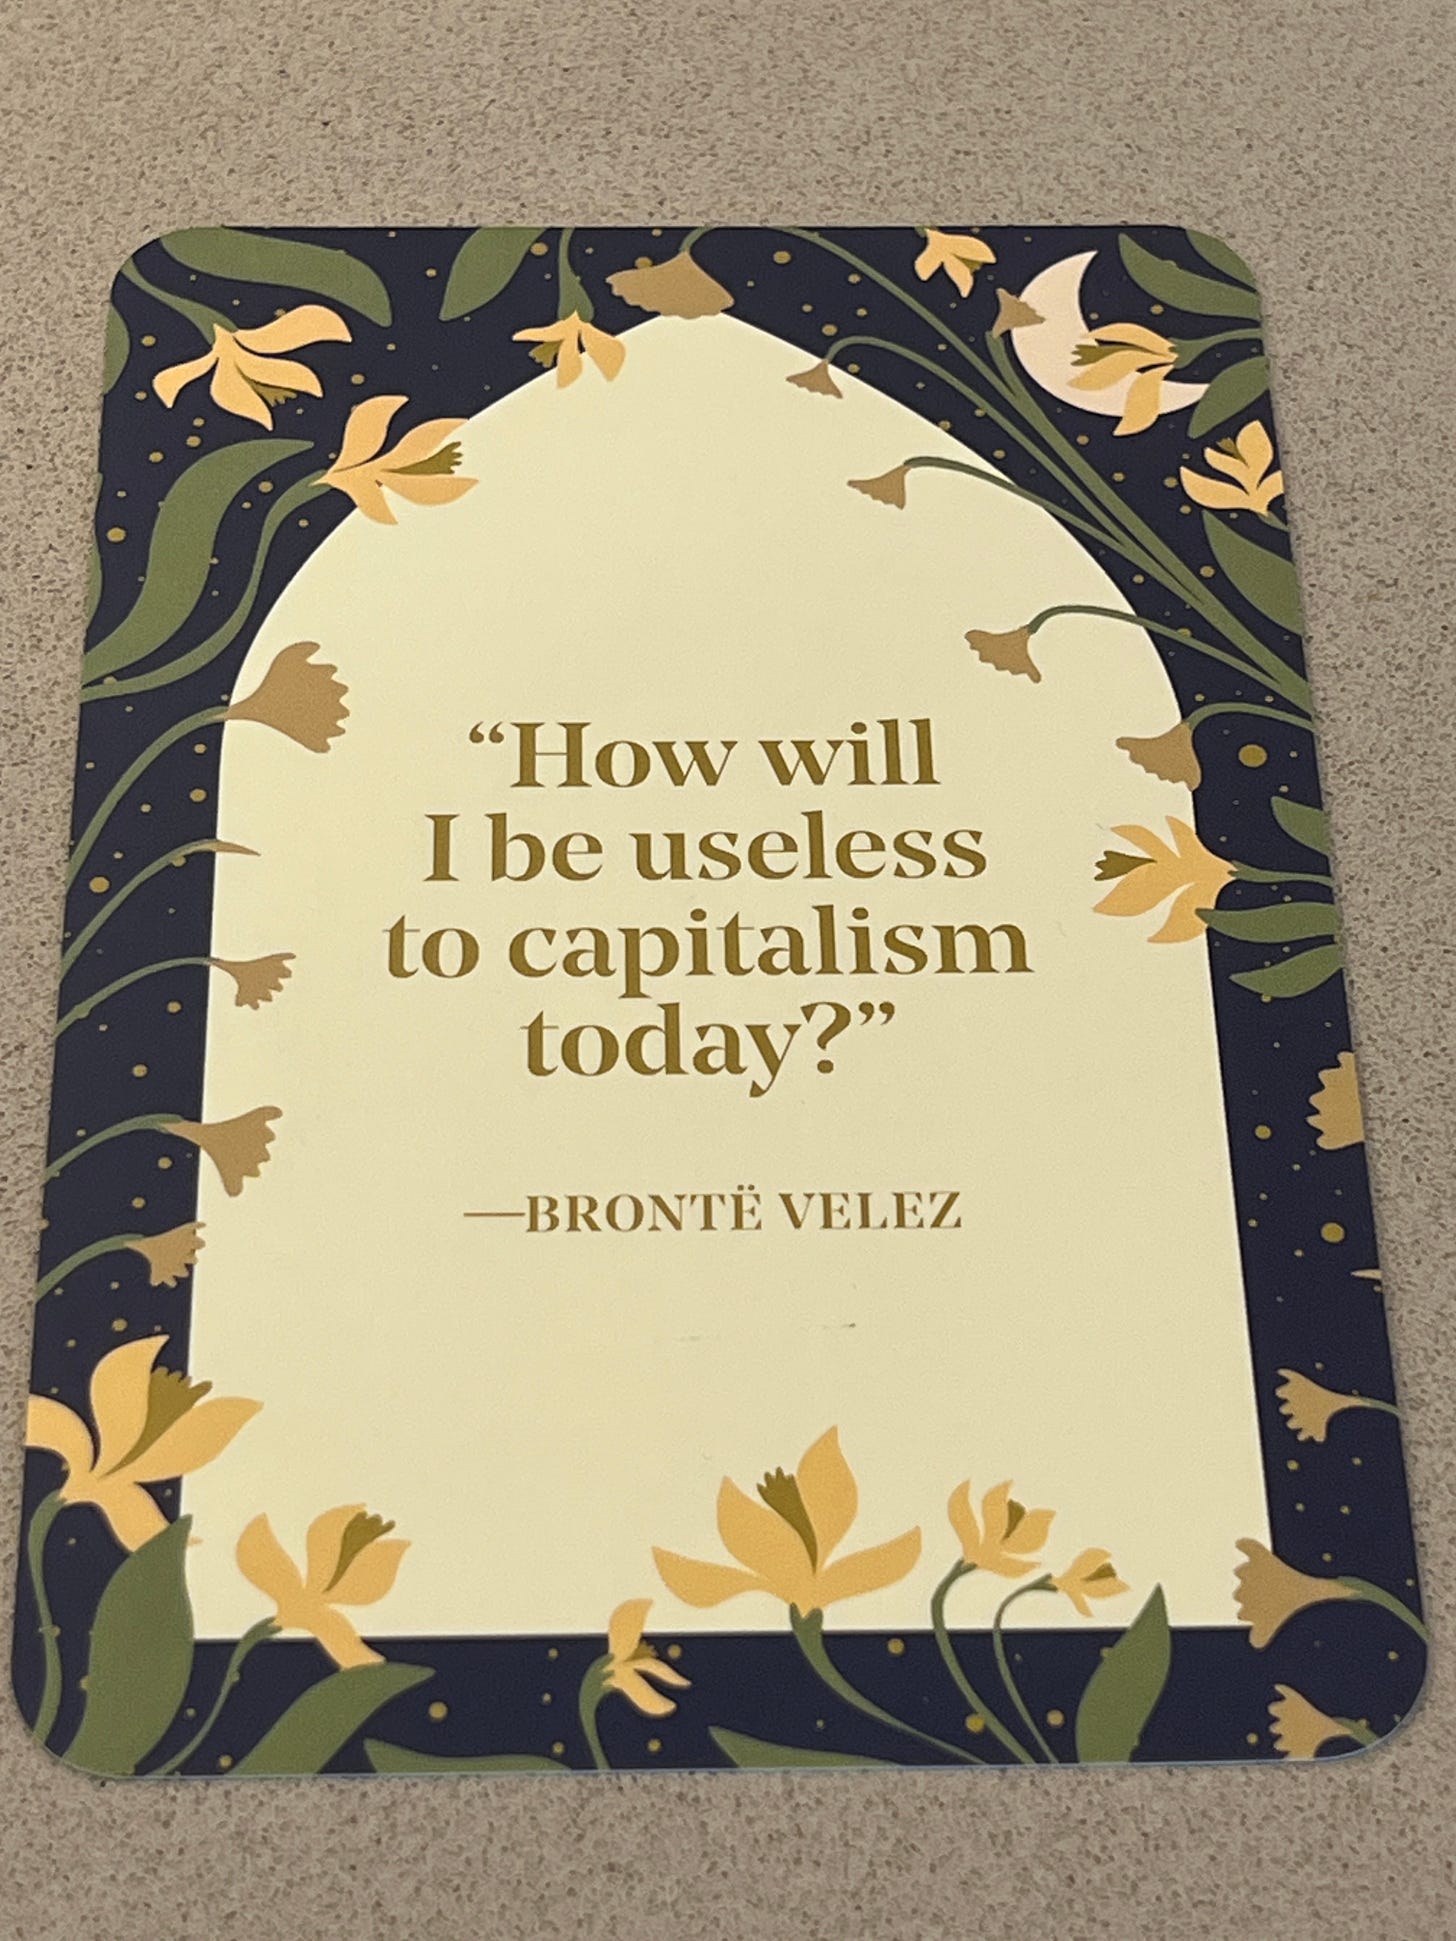 “How will I be useless to capitalism today?” - Bronte Velez